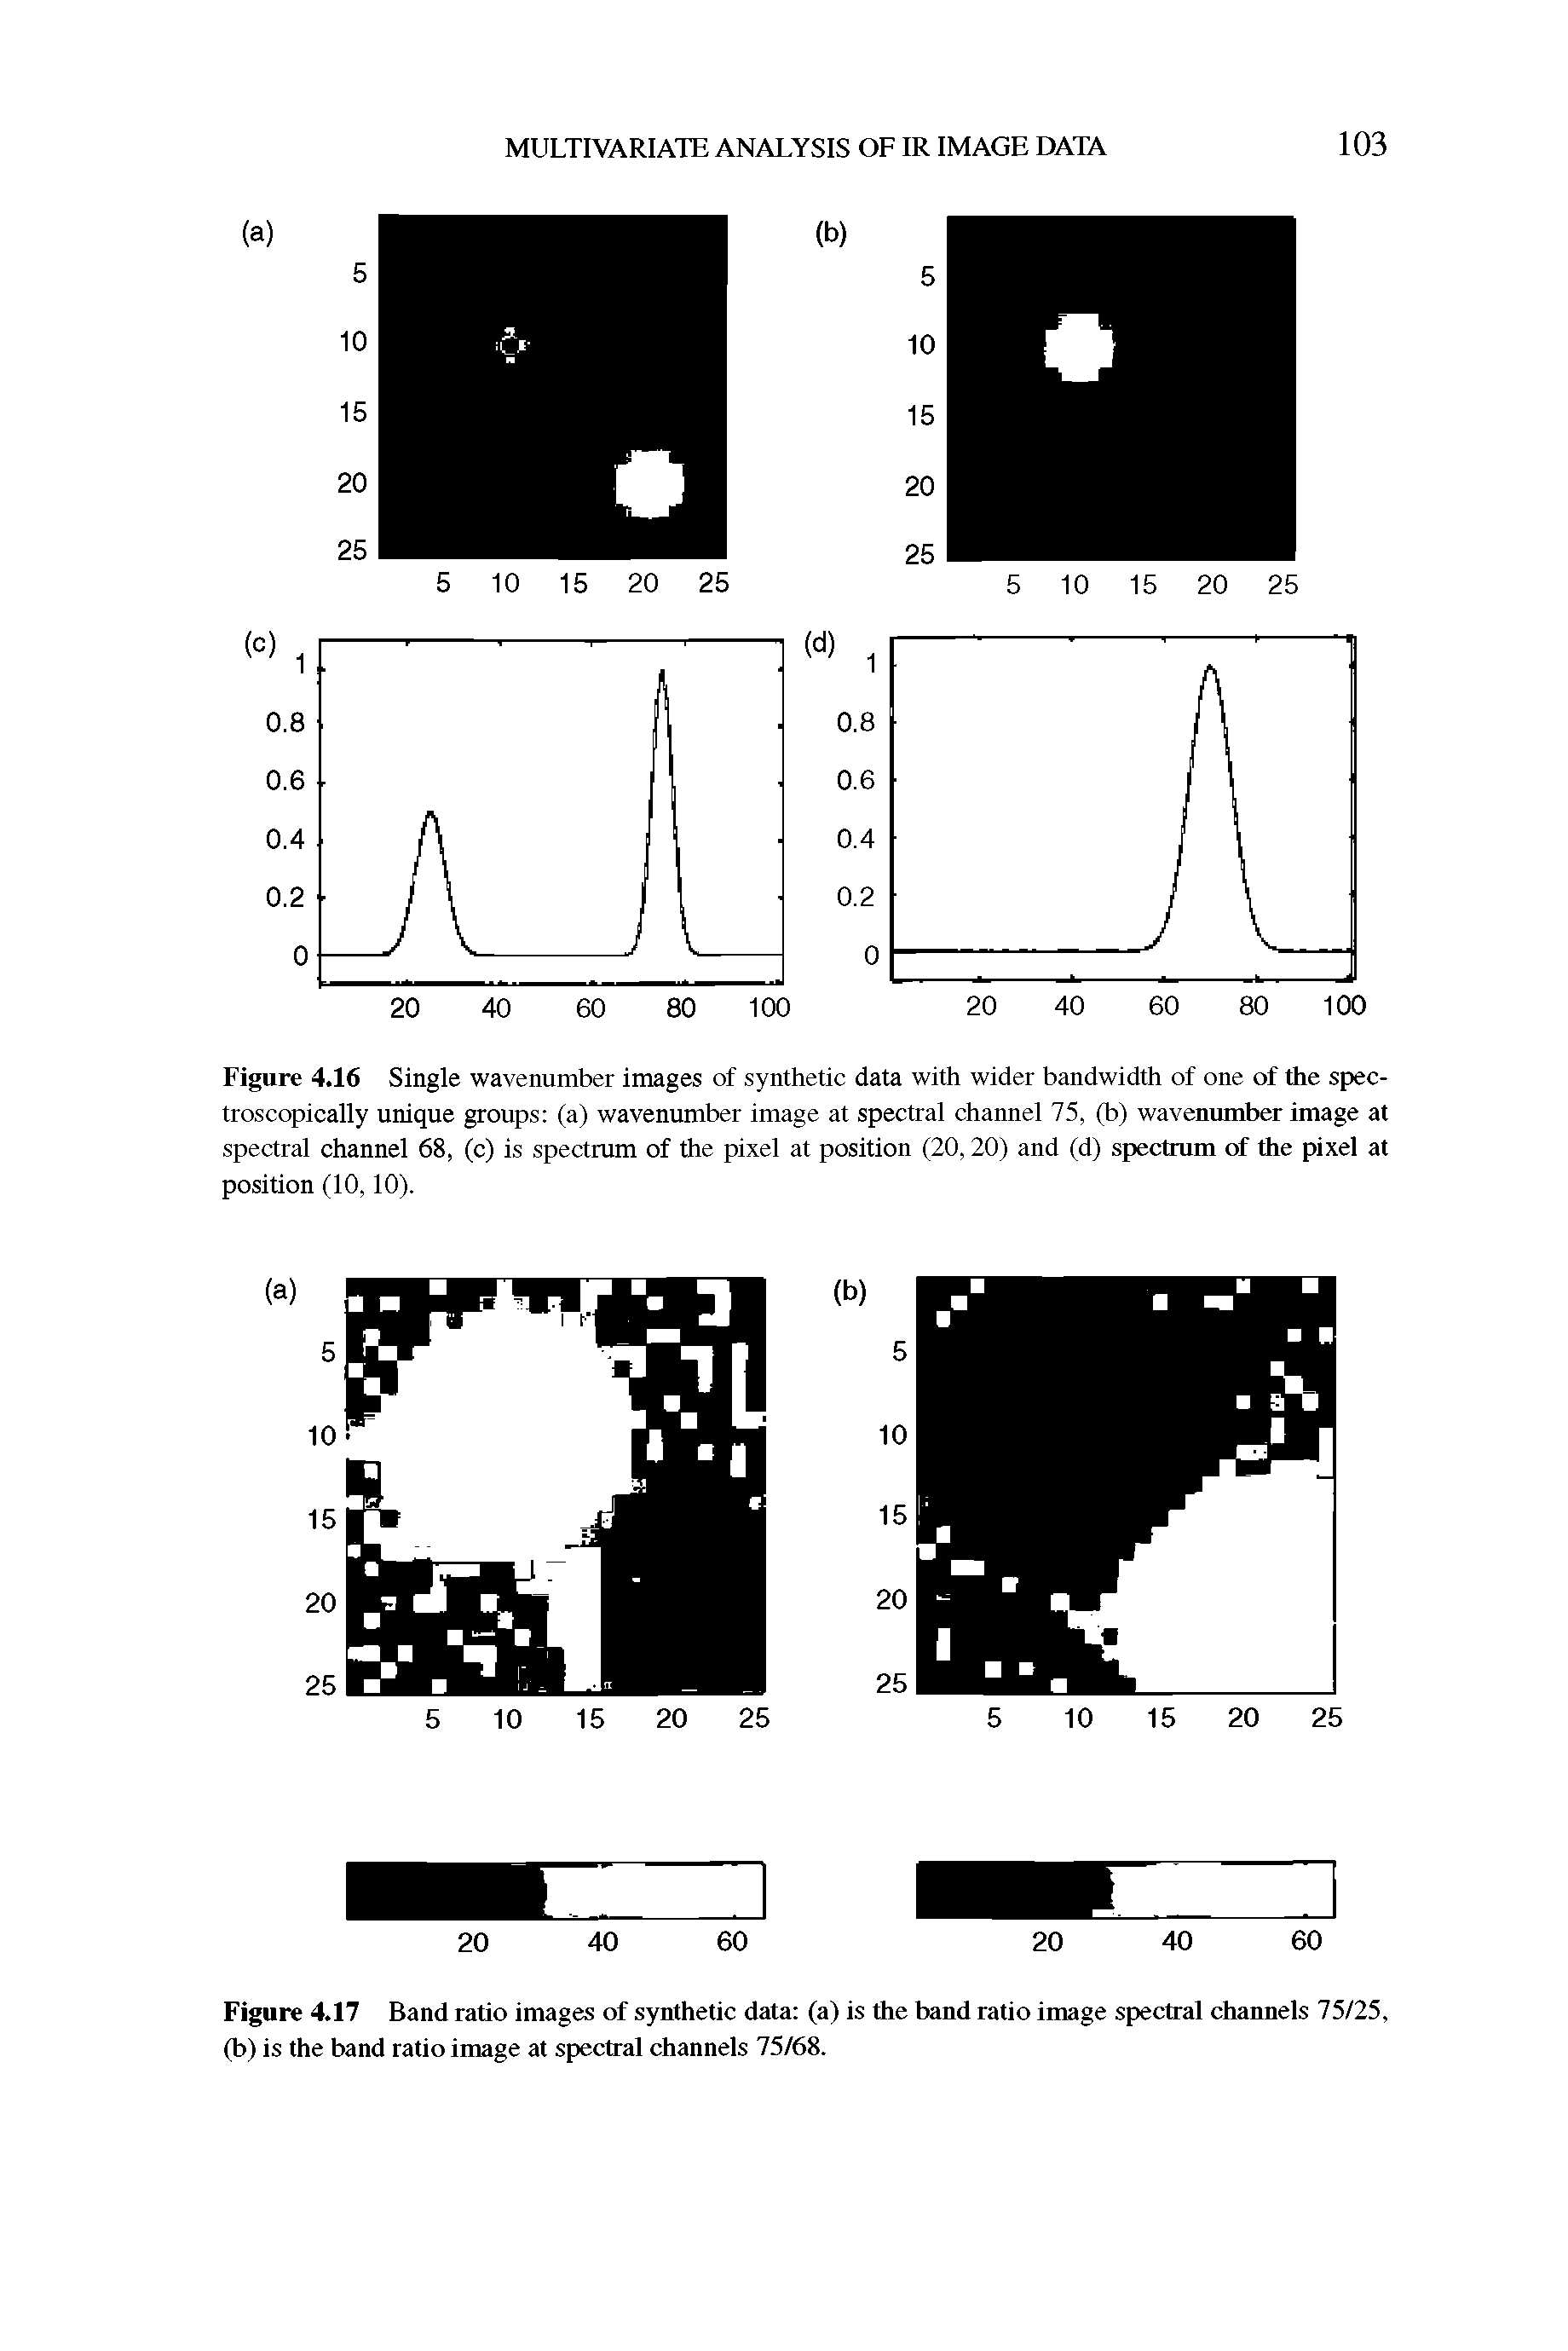 Figure 4.17 Band ratio images of synthetic data (a) is the band ratio image spectral channels 75/25, (b) is the band ratio image at spectral channels 75/68.